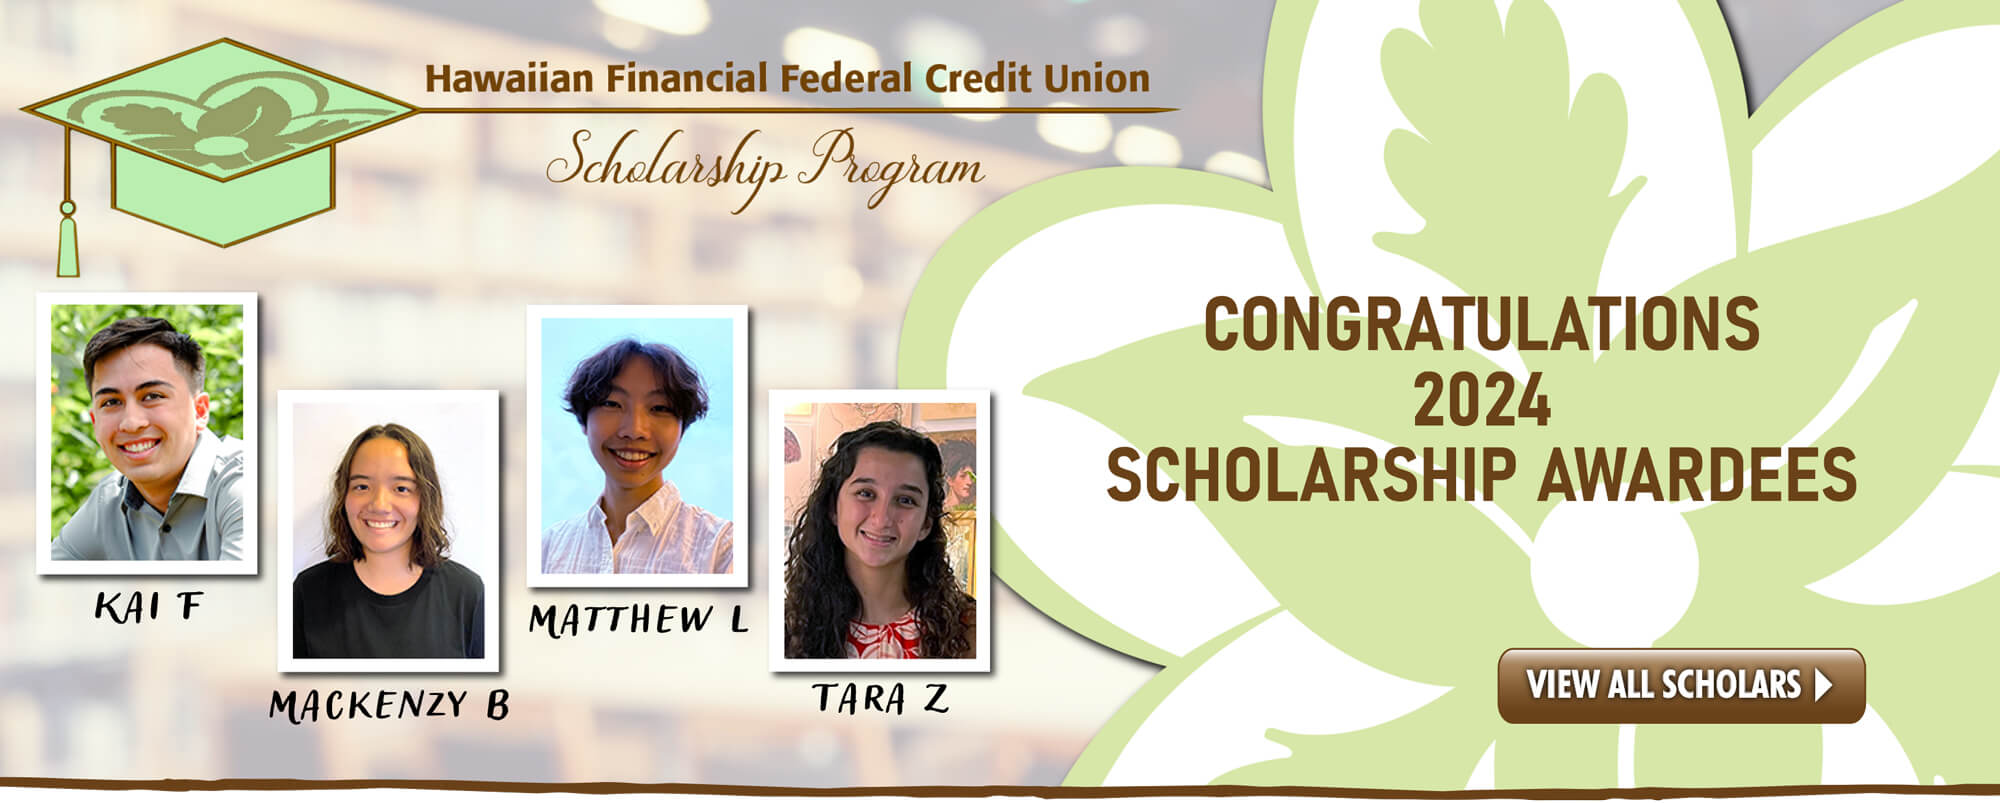 Congratulations to our 2024 Scholarship Awardees!  Click to view all of this year's scholars.